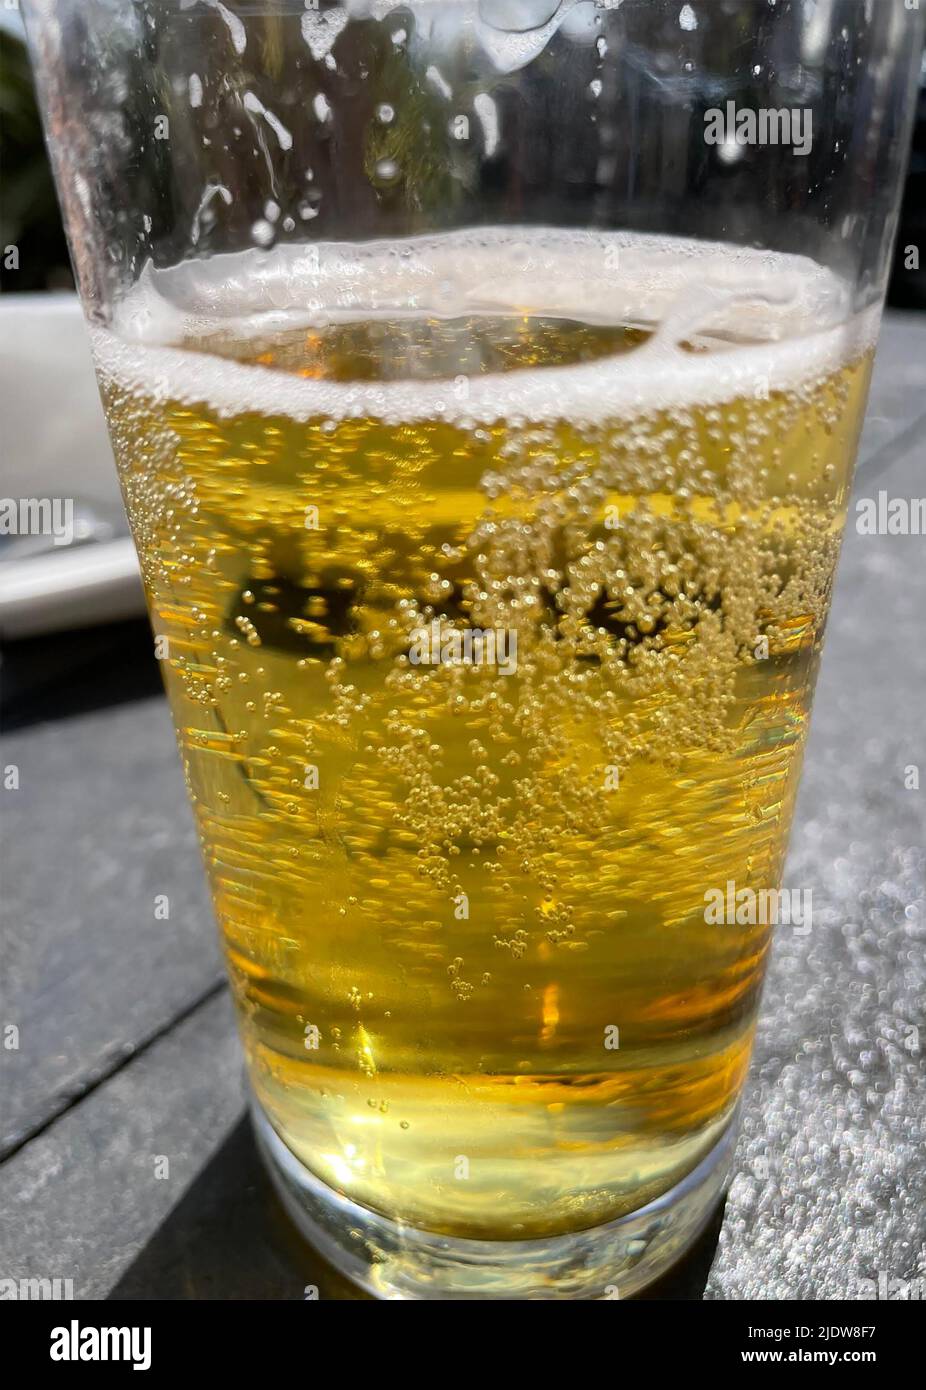 GLASS OF BEER. Photo: Tony Gale Stock Photo